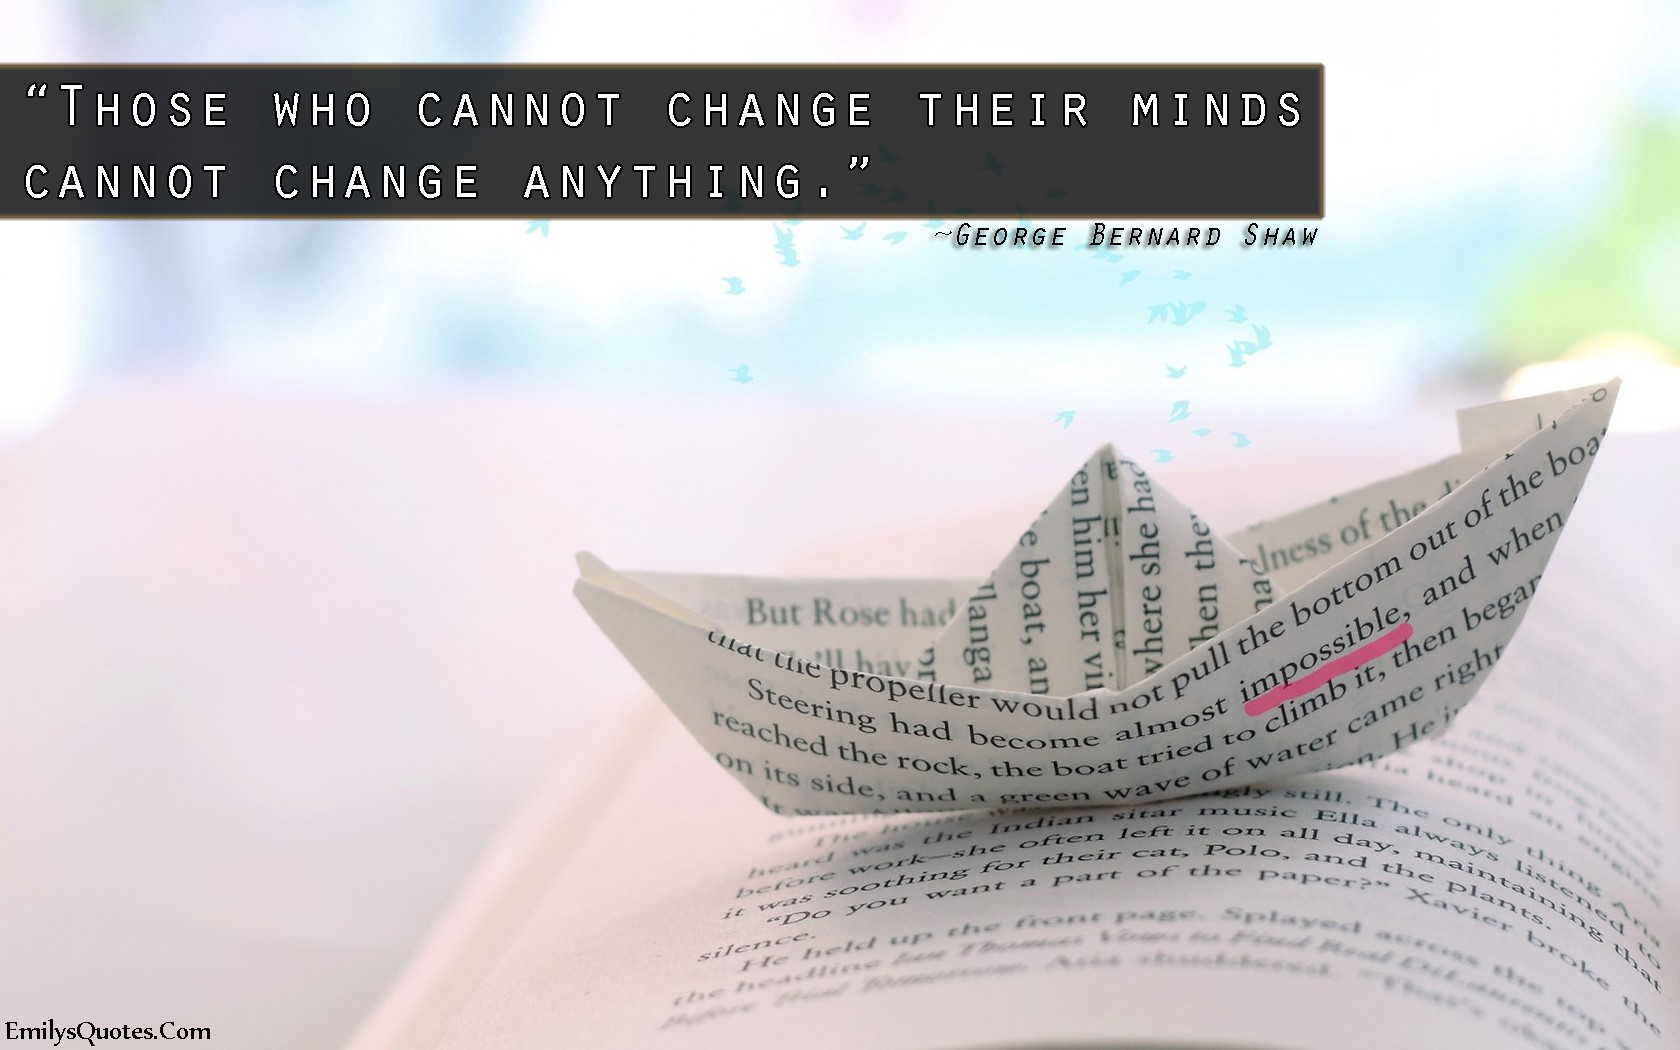 Those who cannot change their minds cannot change anything